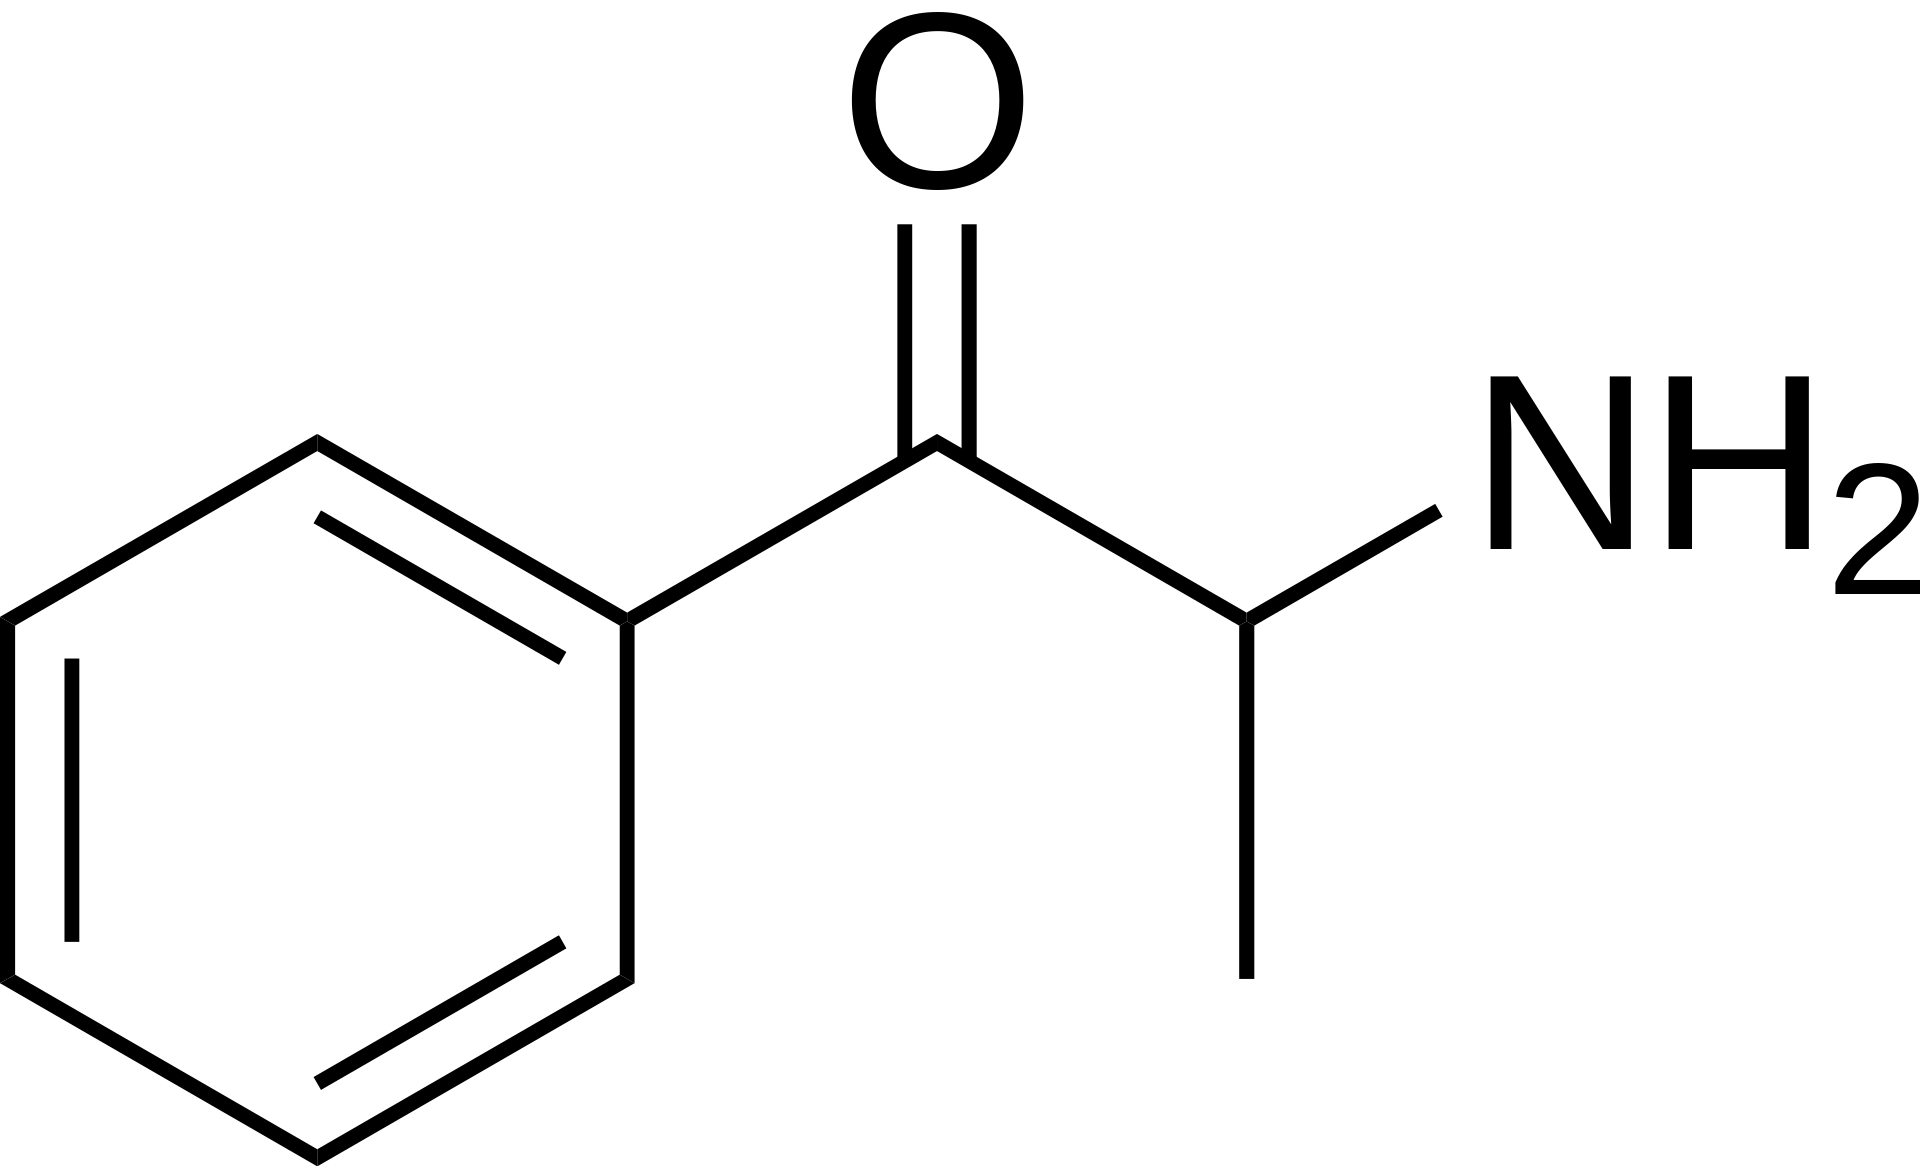 chemical structure of cathinone or bath salts